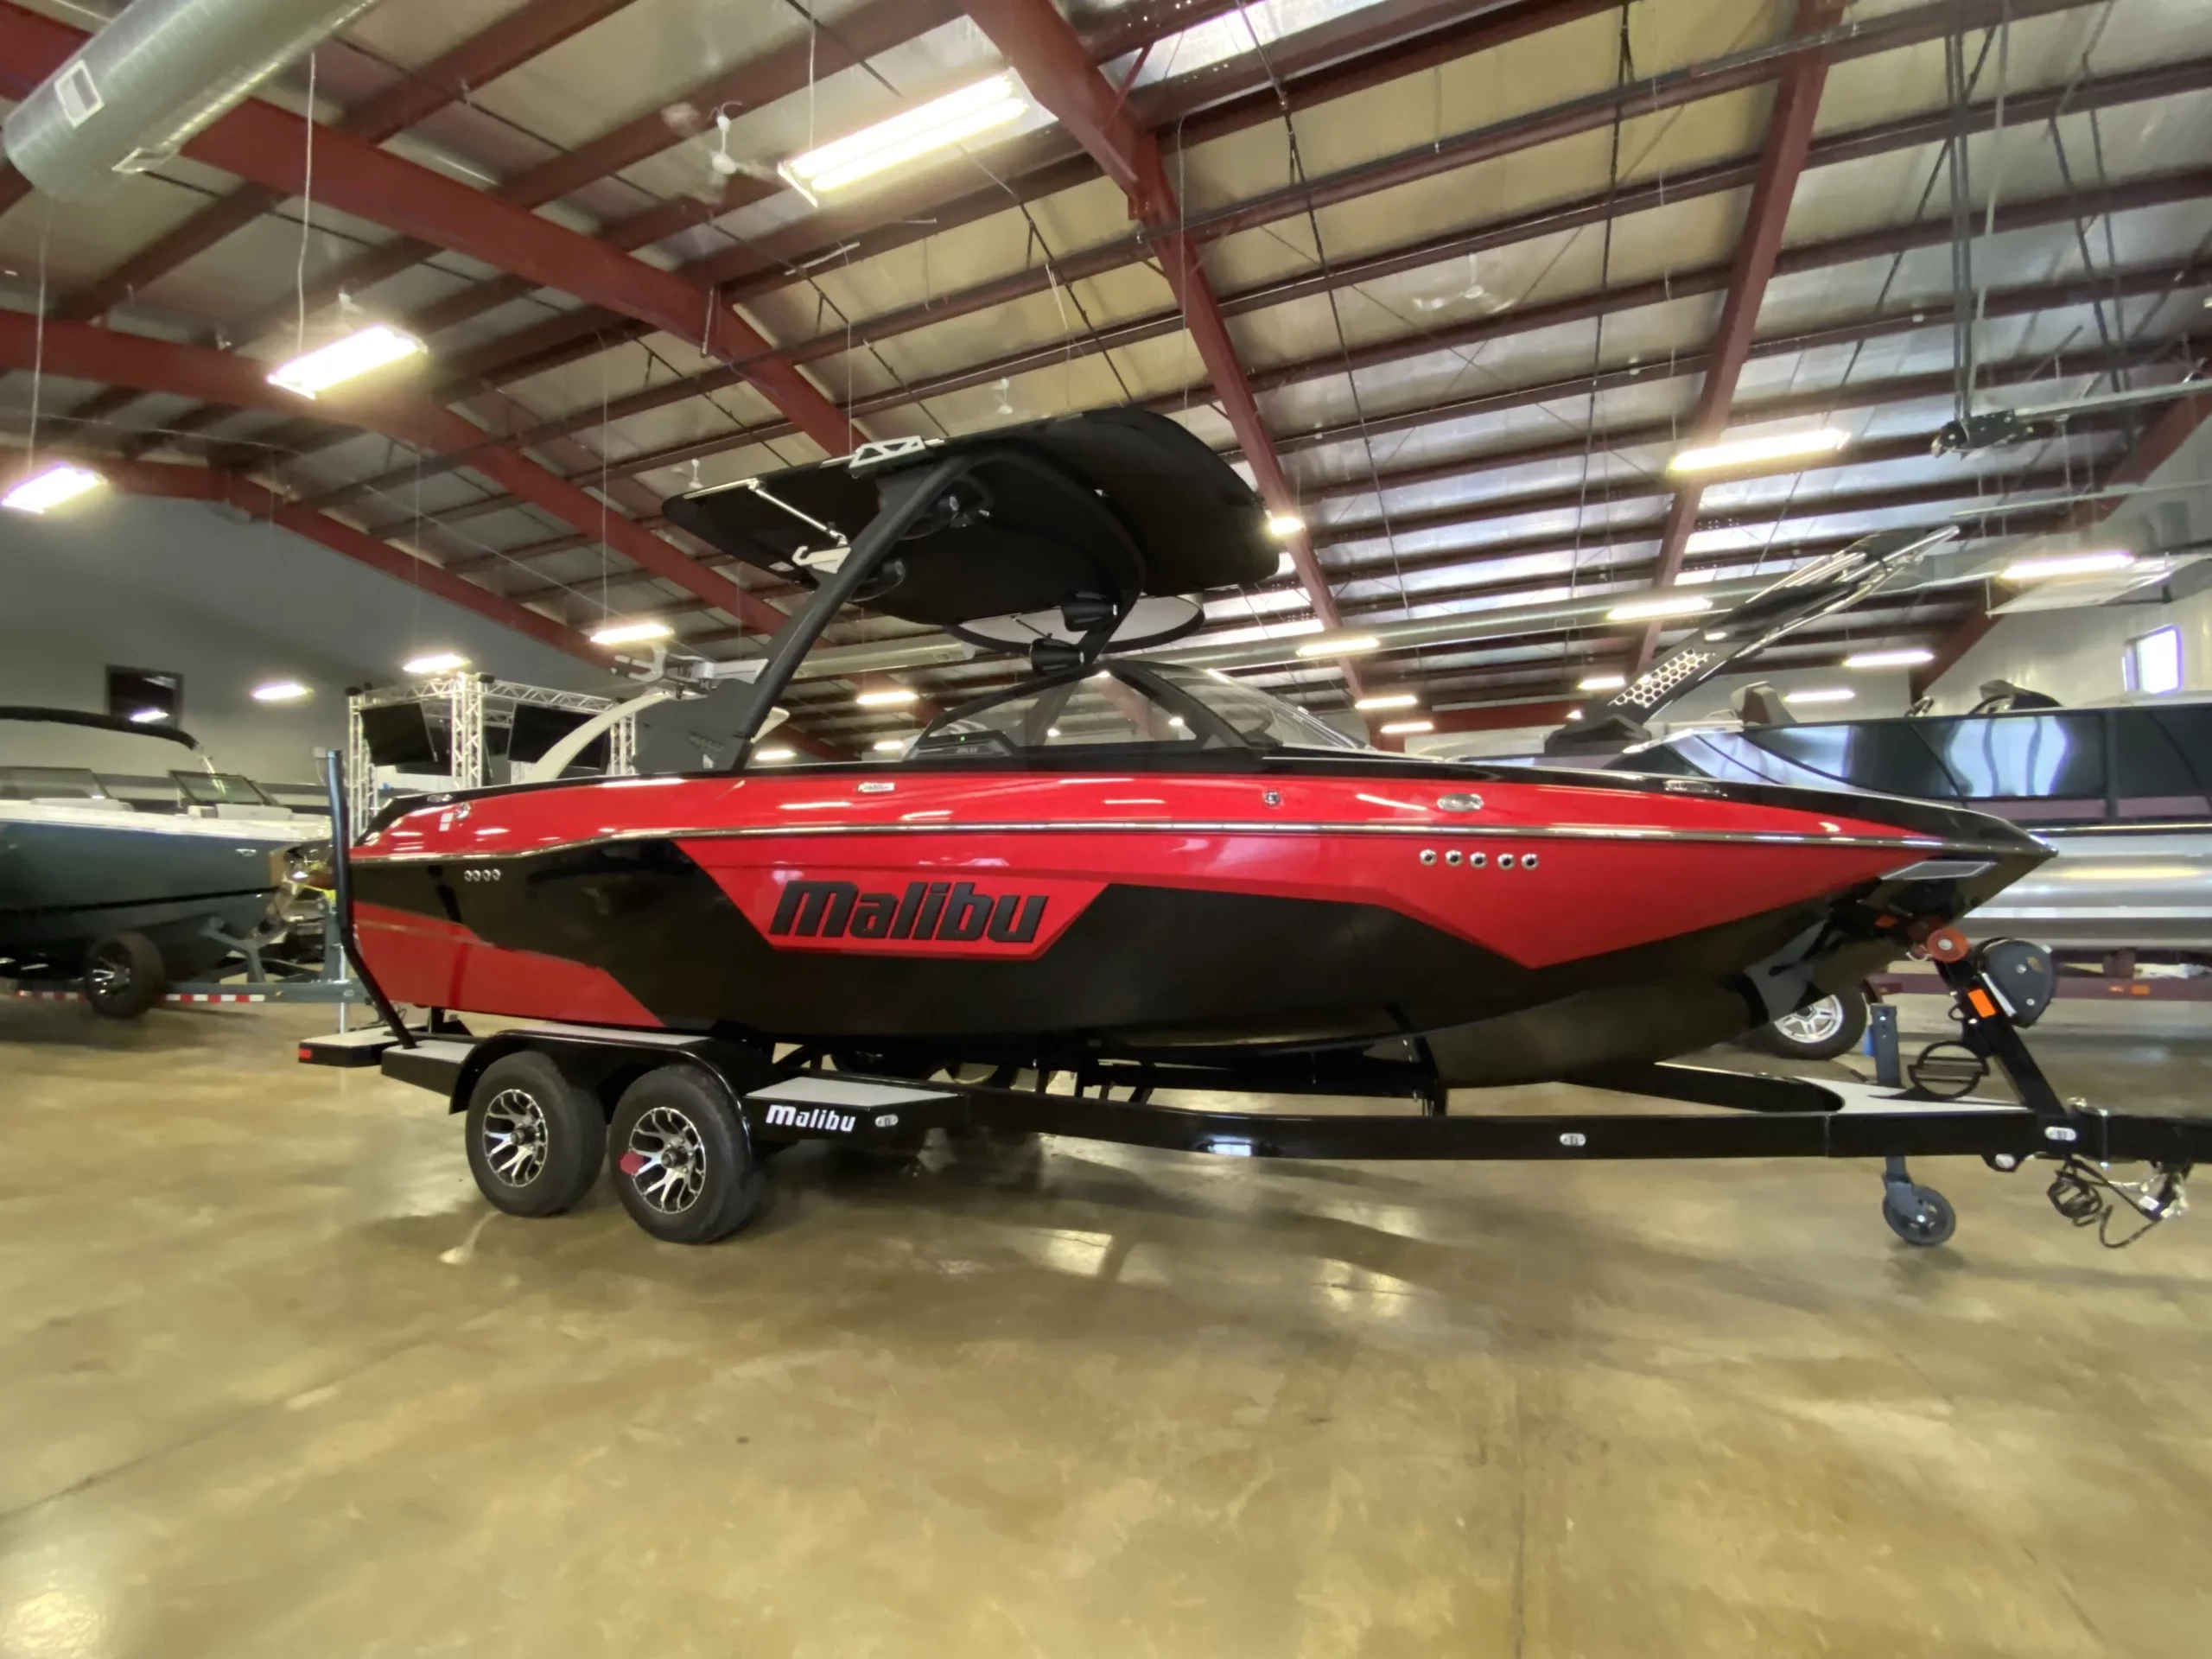 2022 Malibui Wakesetter Boat For Sale at Valley Marine Red